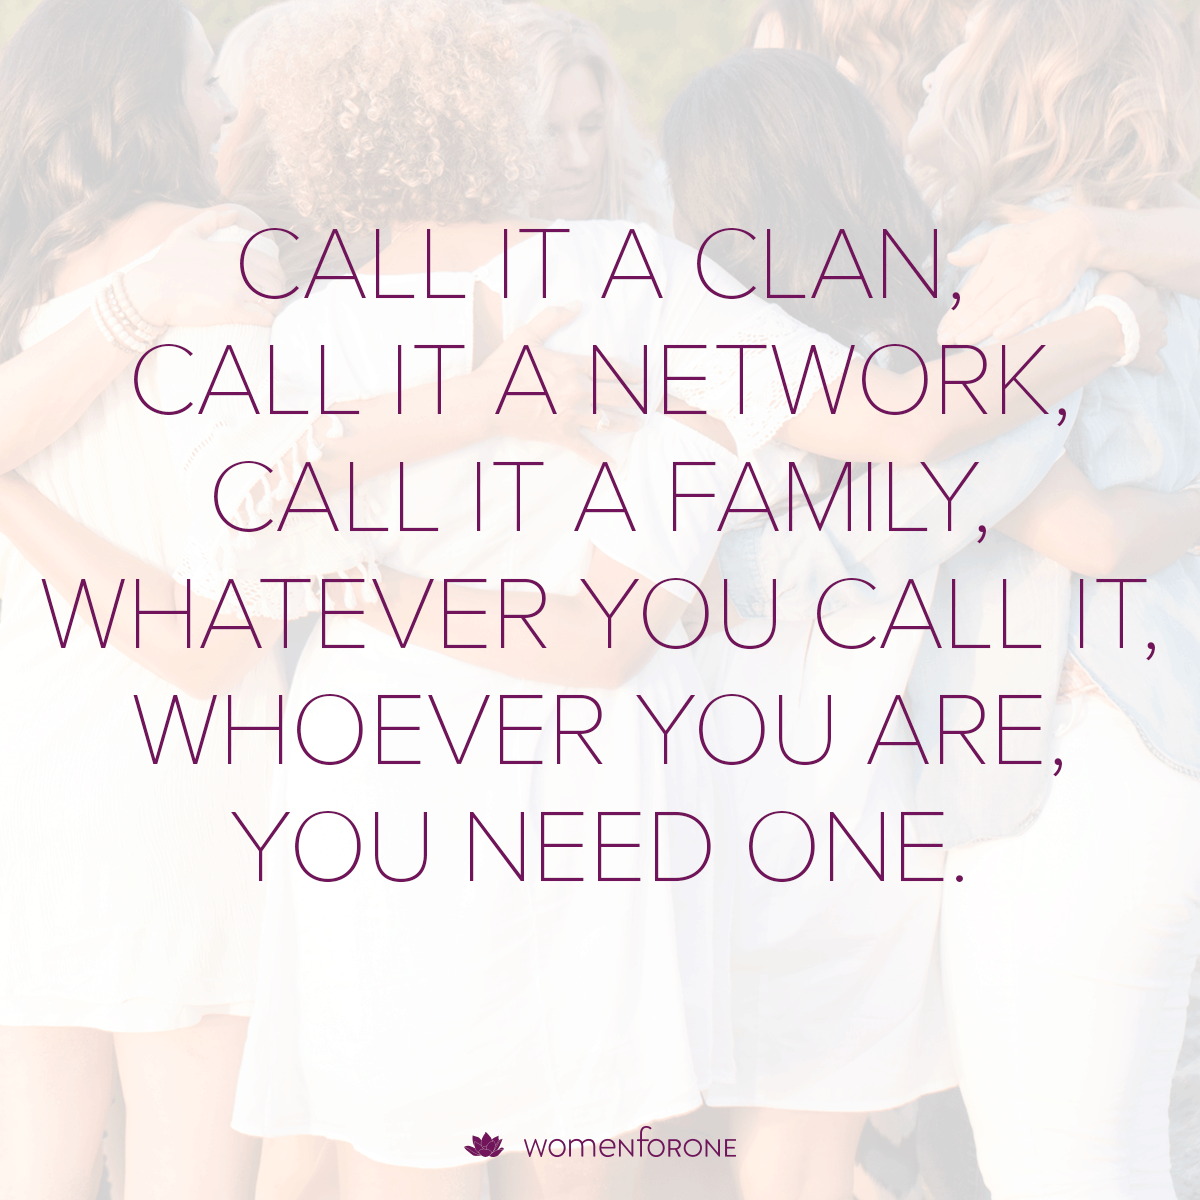 Call it a clan, call it a network, call it a family, whatever you call it, whoever you are, you need one.